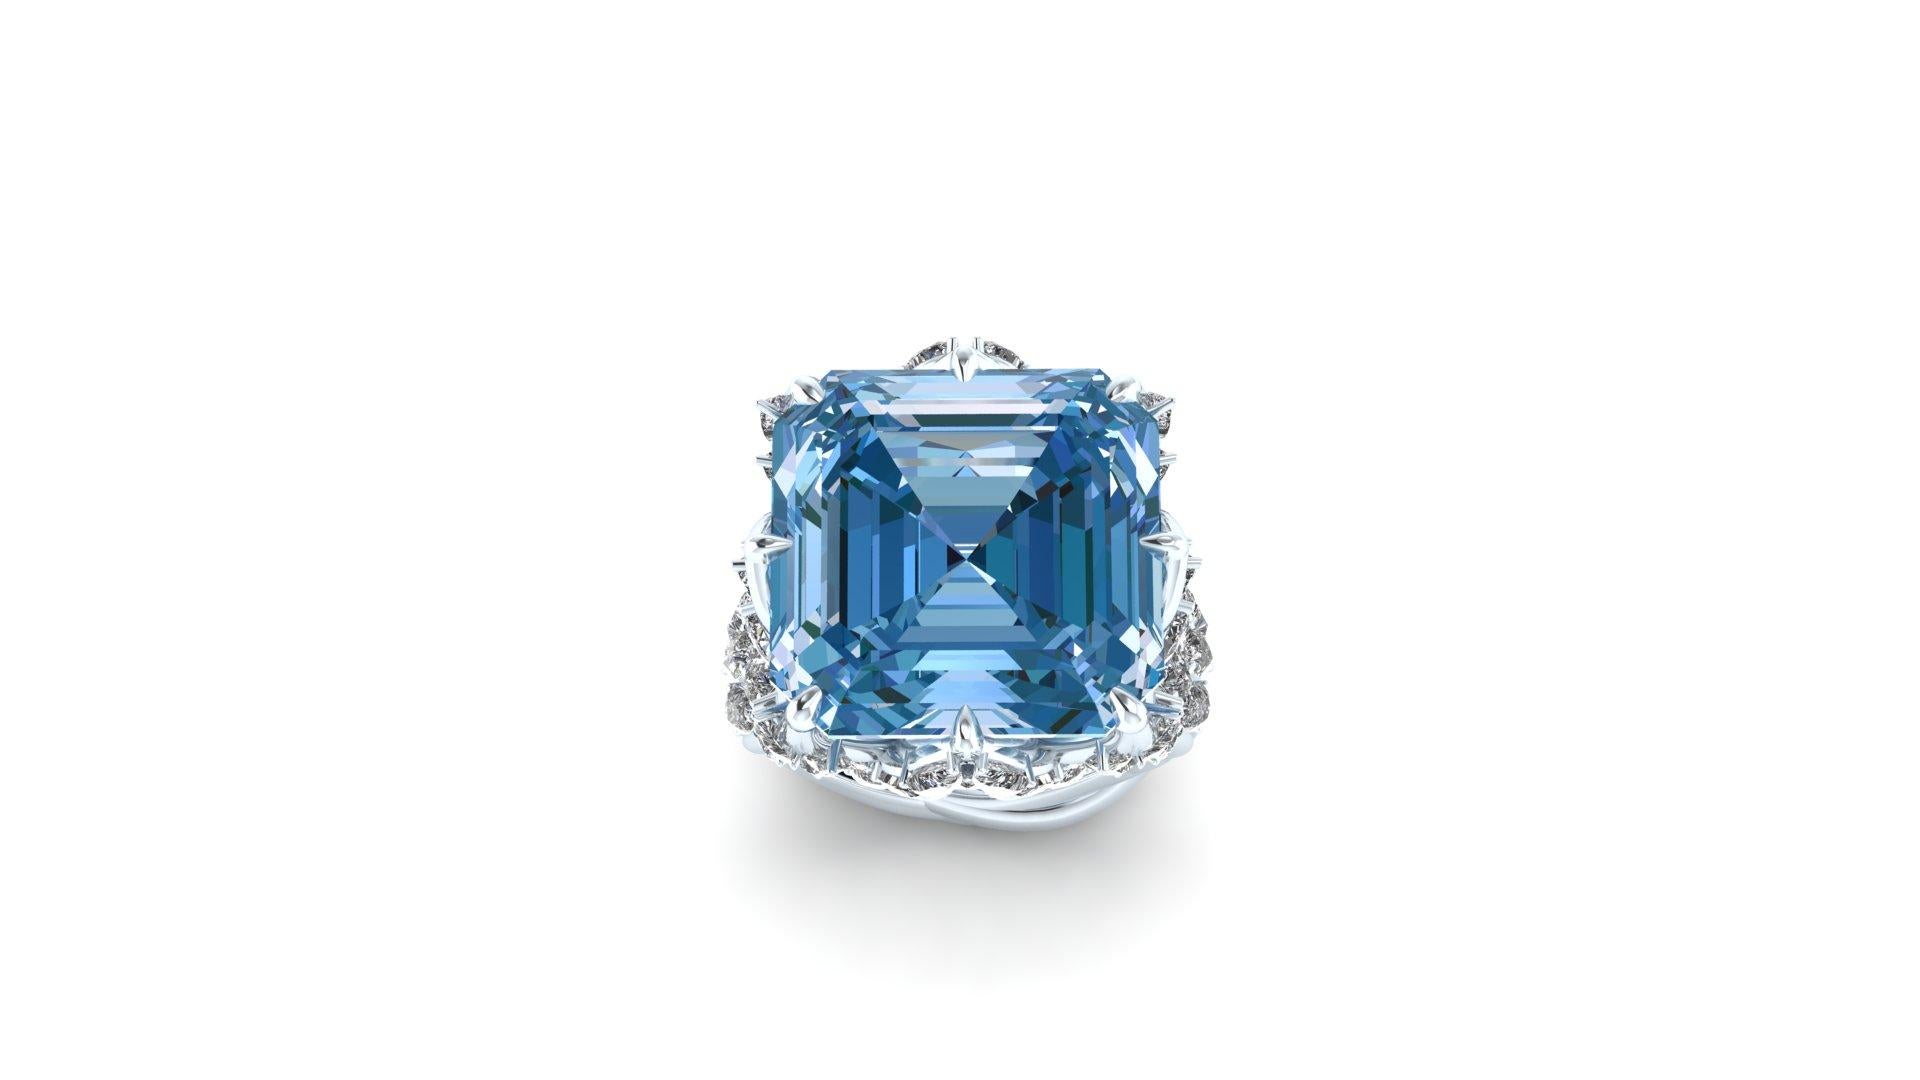 23.88 carat Natural Blue Ascher cut Aquamarine gemstone, of a high quality intense blue, transparent mineral with no inclusions, perfect choice for collectors or to commission a custom, unique piece of jewelry with it.
The ring is conceived either